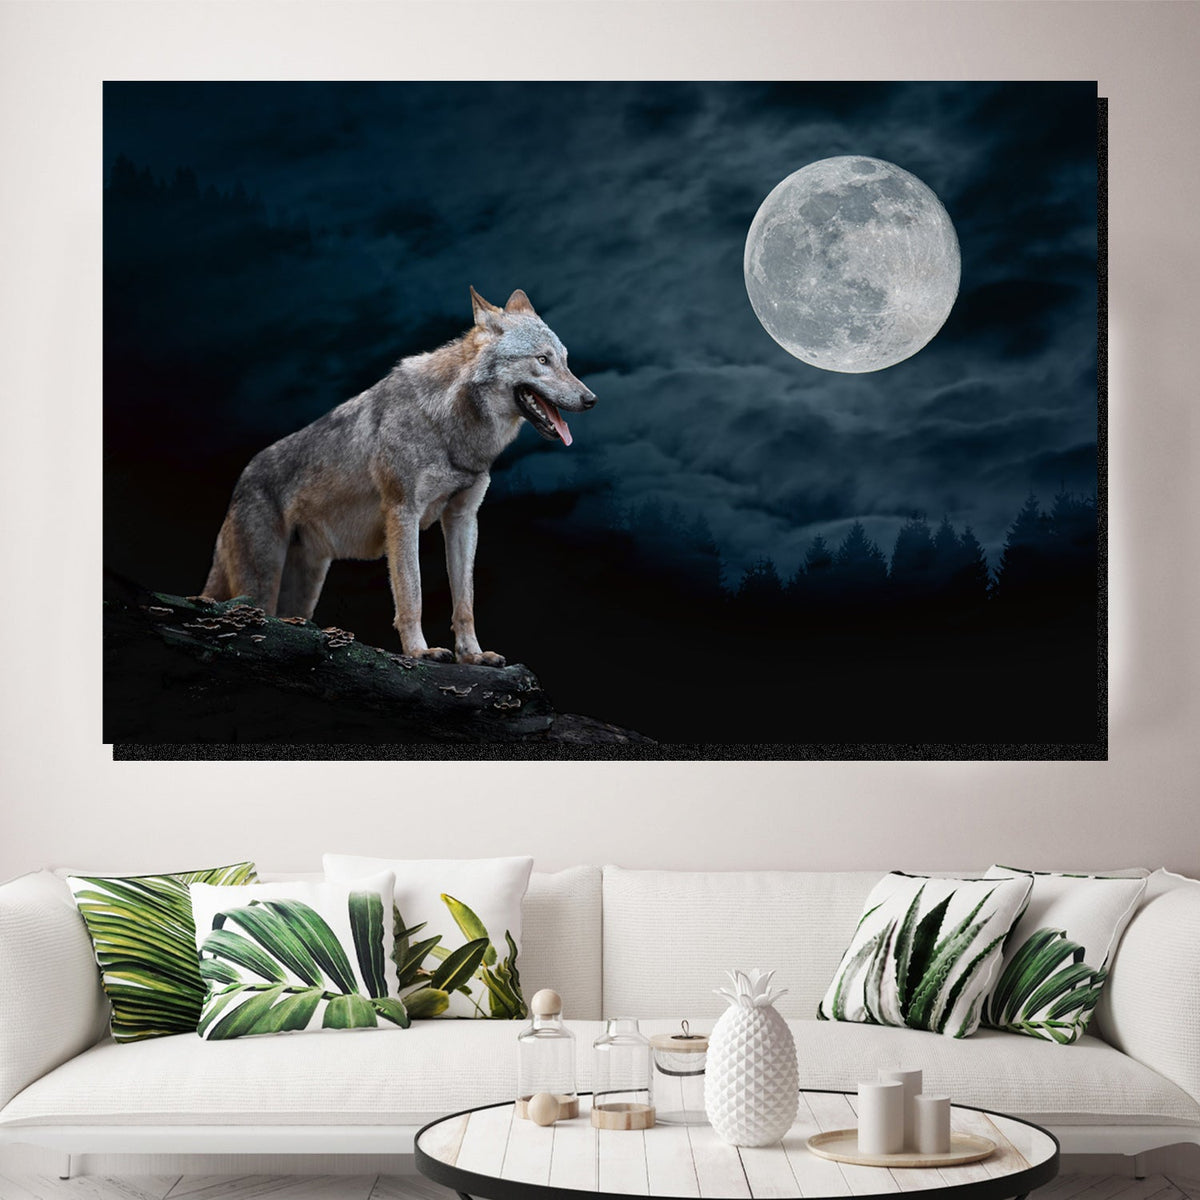 https://cdn.shopify.com/s/files/1/0387/9986/8044/products/NightWolfCanvasArtprintStretched-4.jpg